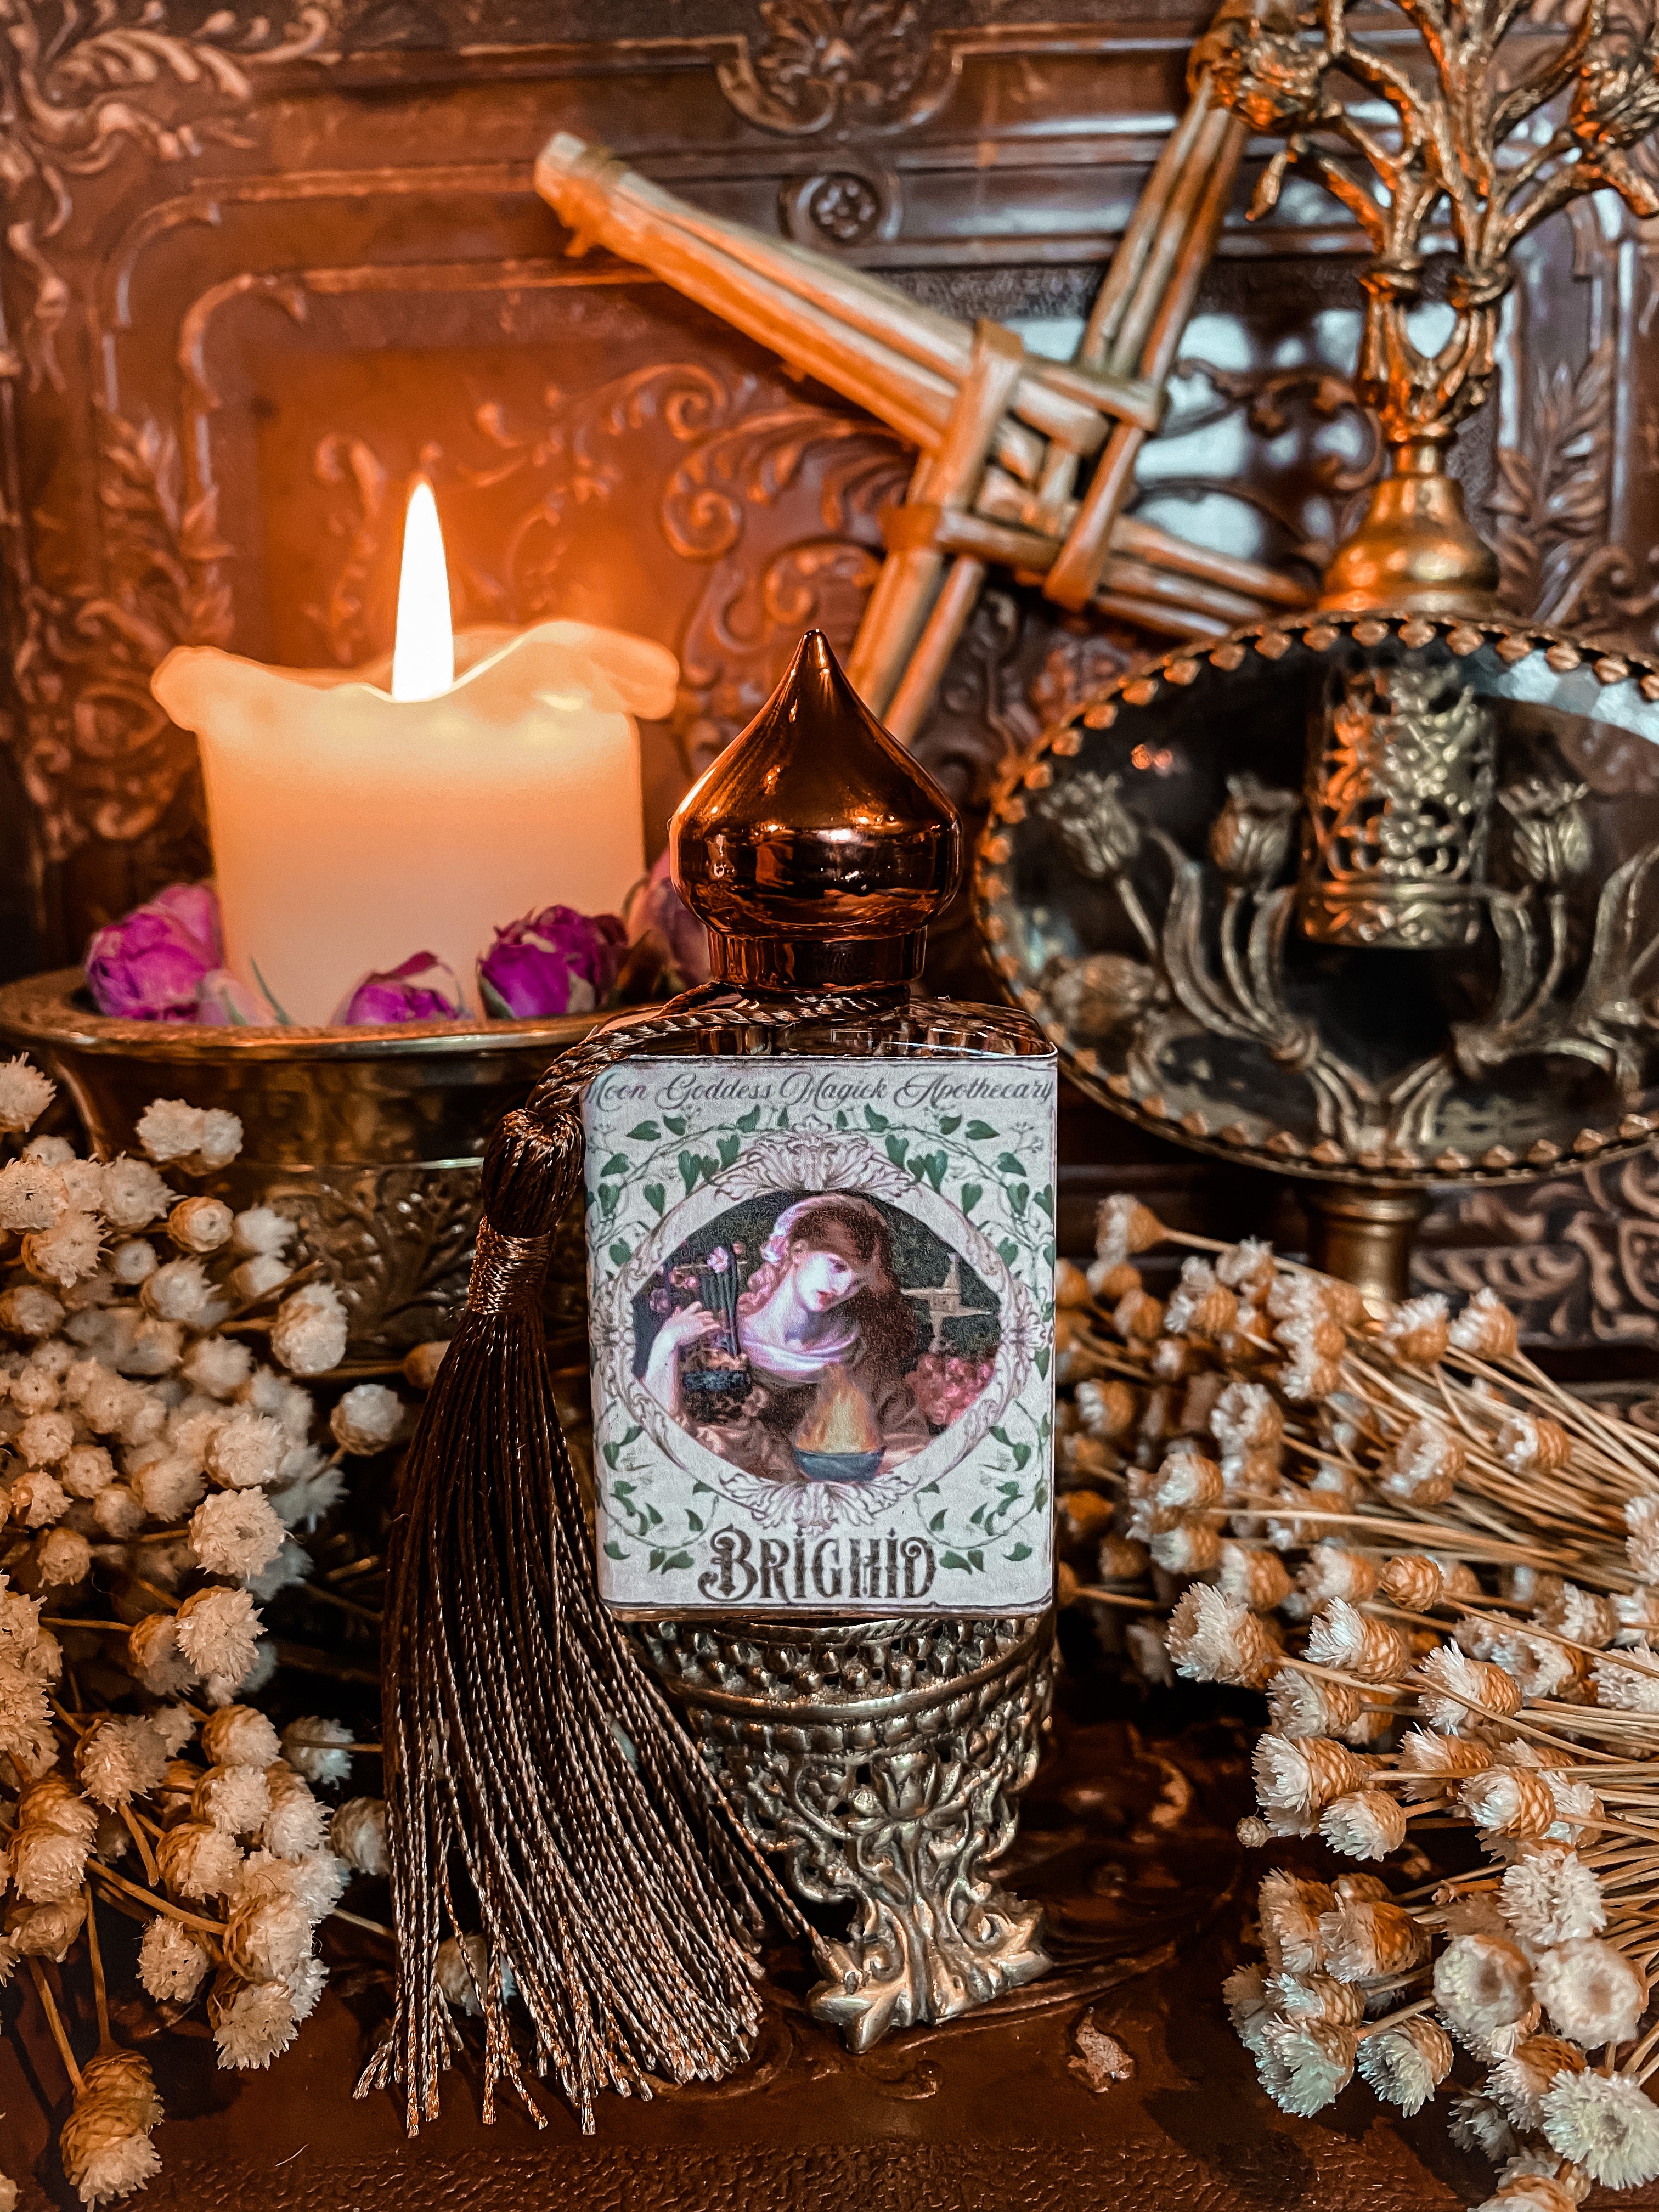 Brighid Devotional Oil // Brigid, Bri, Brighid, Brigit // Anointing Oil // To Honor and Invoke the Exalted One // Flame Tender / Imbolc